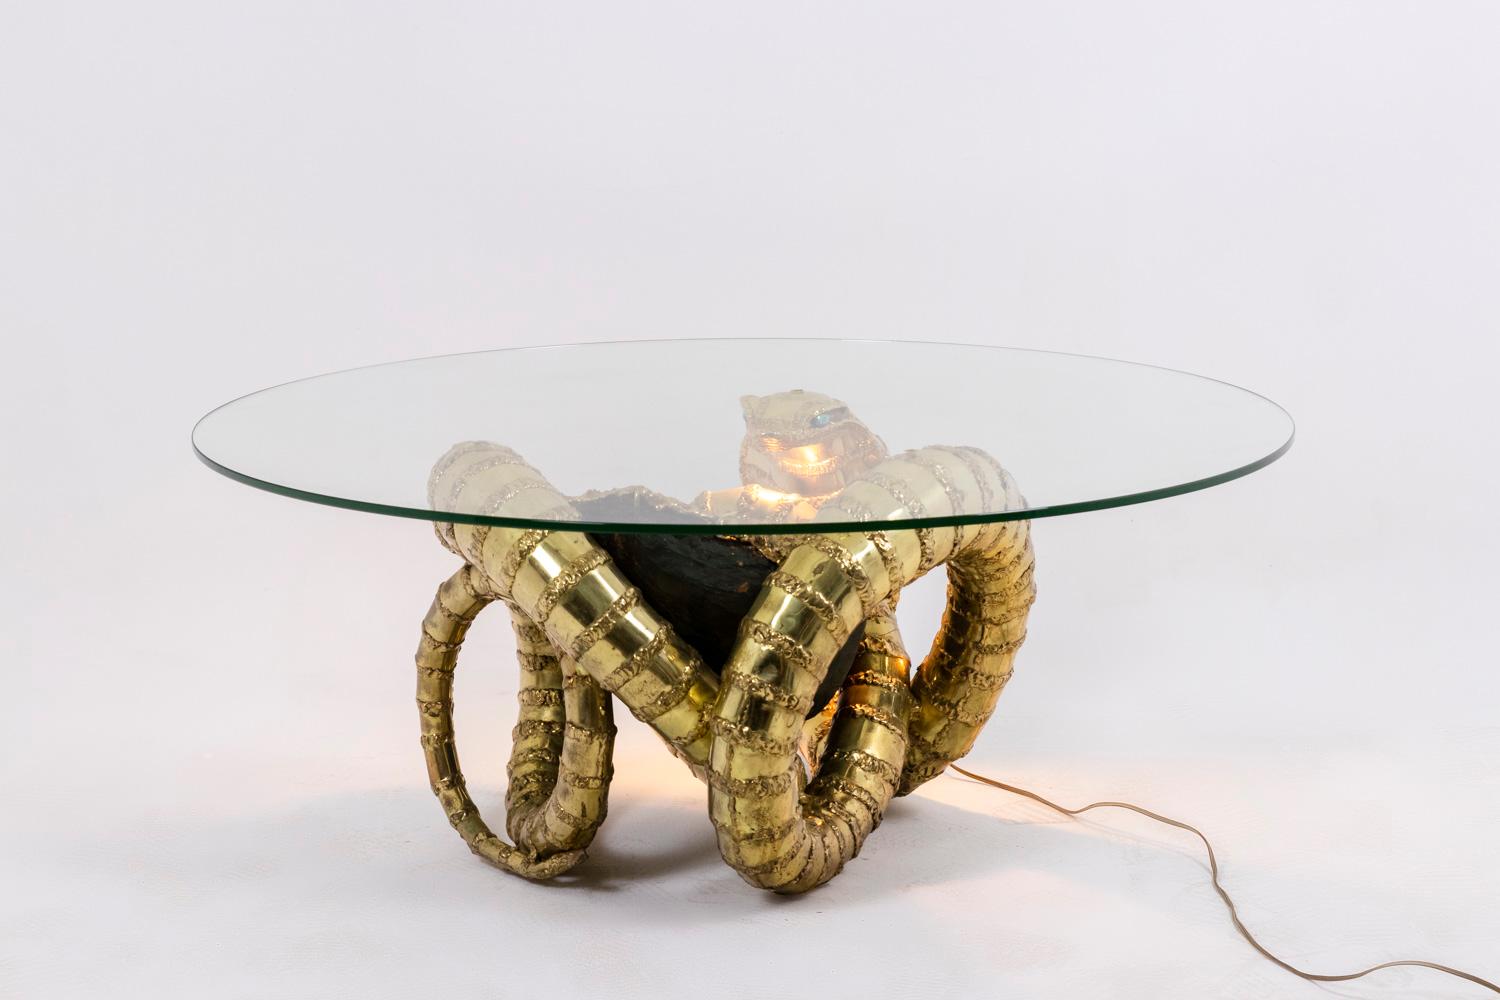 Henri Fernandez, by.

Coffee table “Cobra”, depicting a snake and presenting an amethyst in its center with a lighting system placed under its neck to illuminate the amethyst. Round glass top.